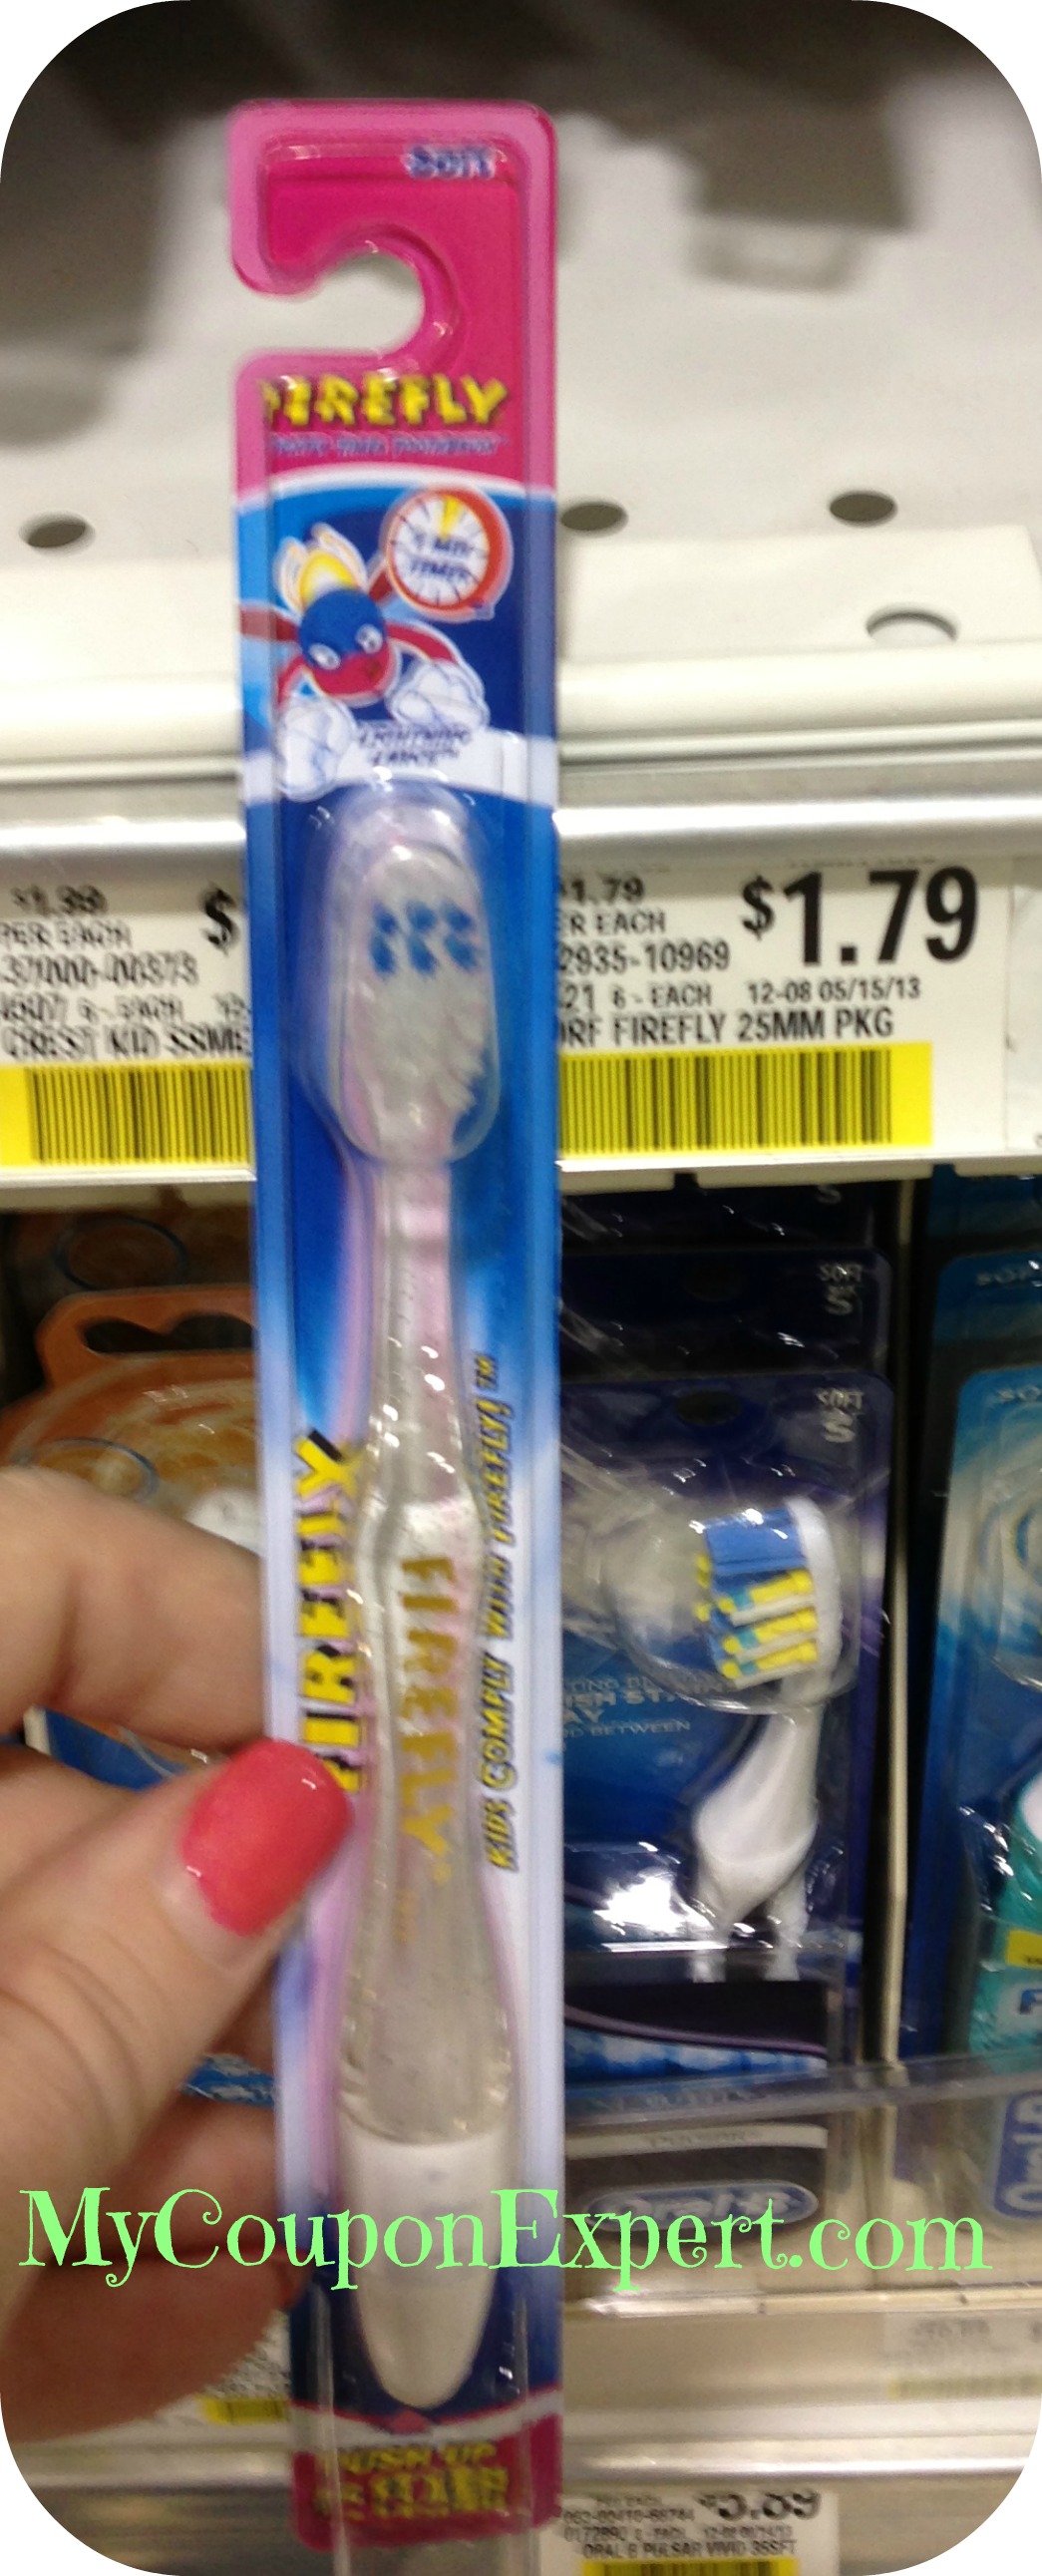 Publix Hot Deal Alert! OVERAGE on Firefly Toothbrushes Until 12/19